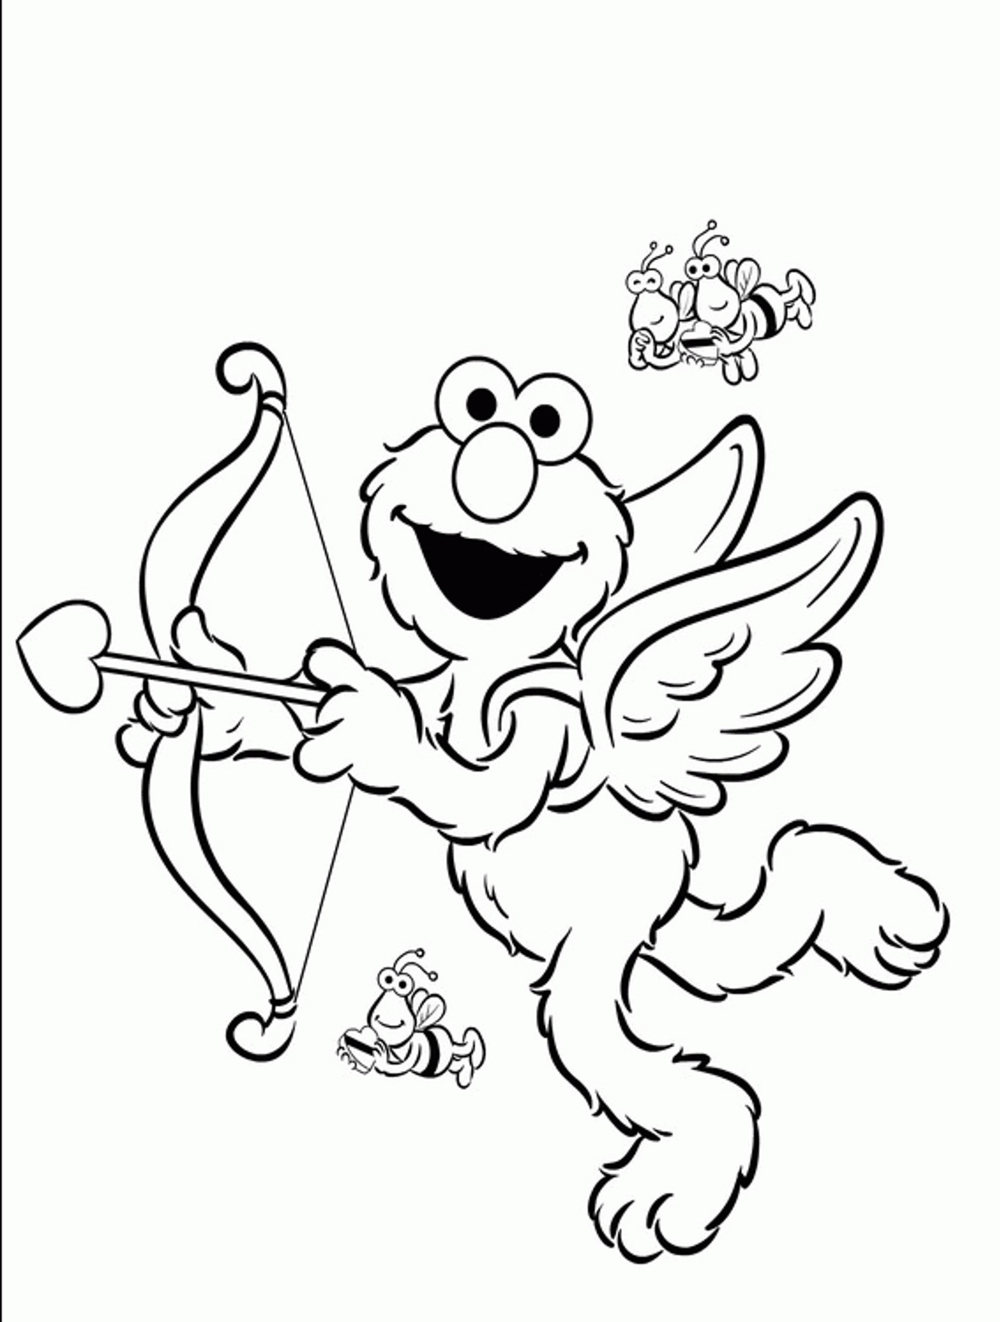 Download Print & Download - Elmo Coloring Pages for Children's Home ...